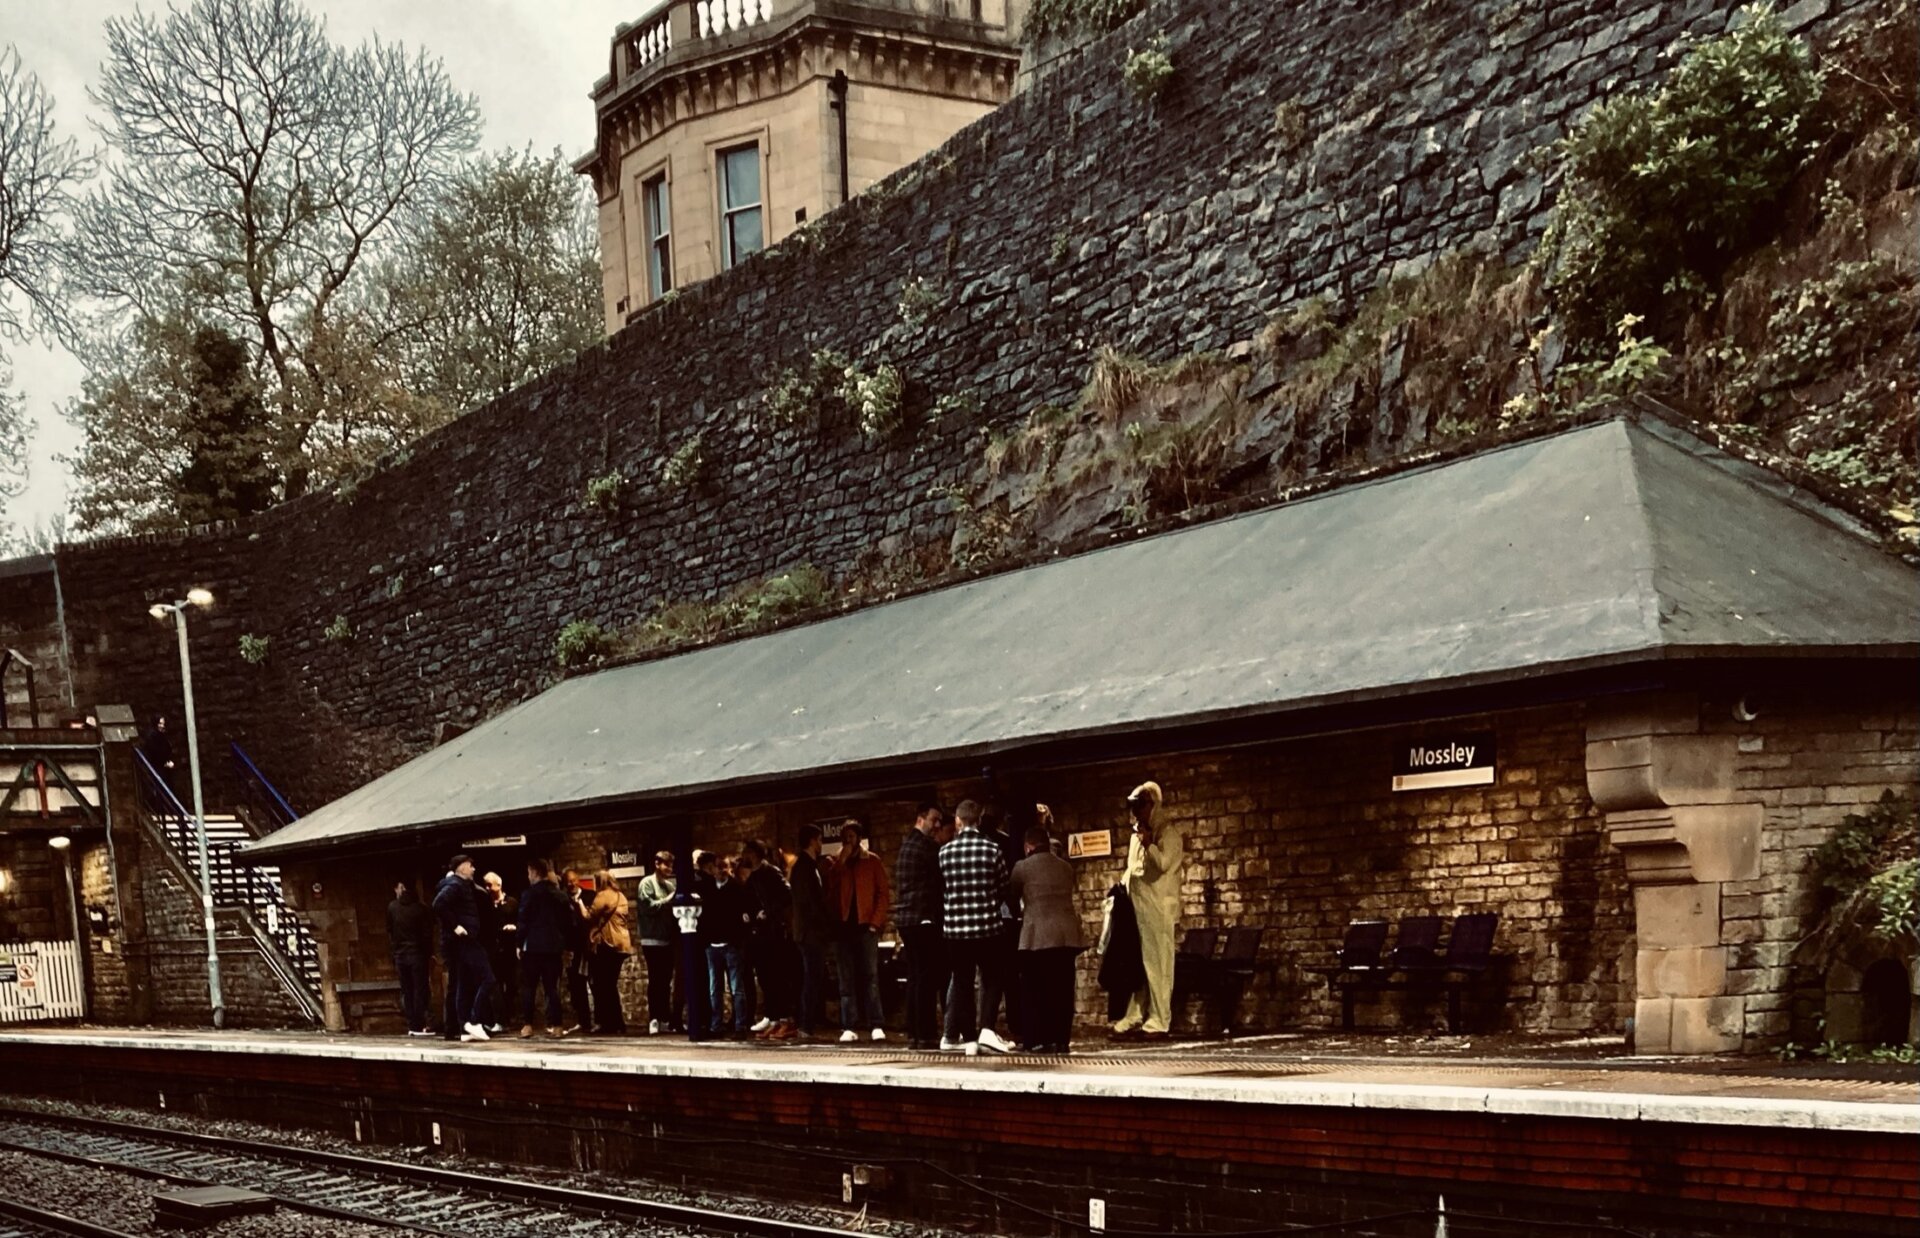 Football fans at Mossley Station